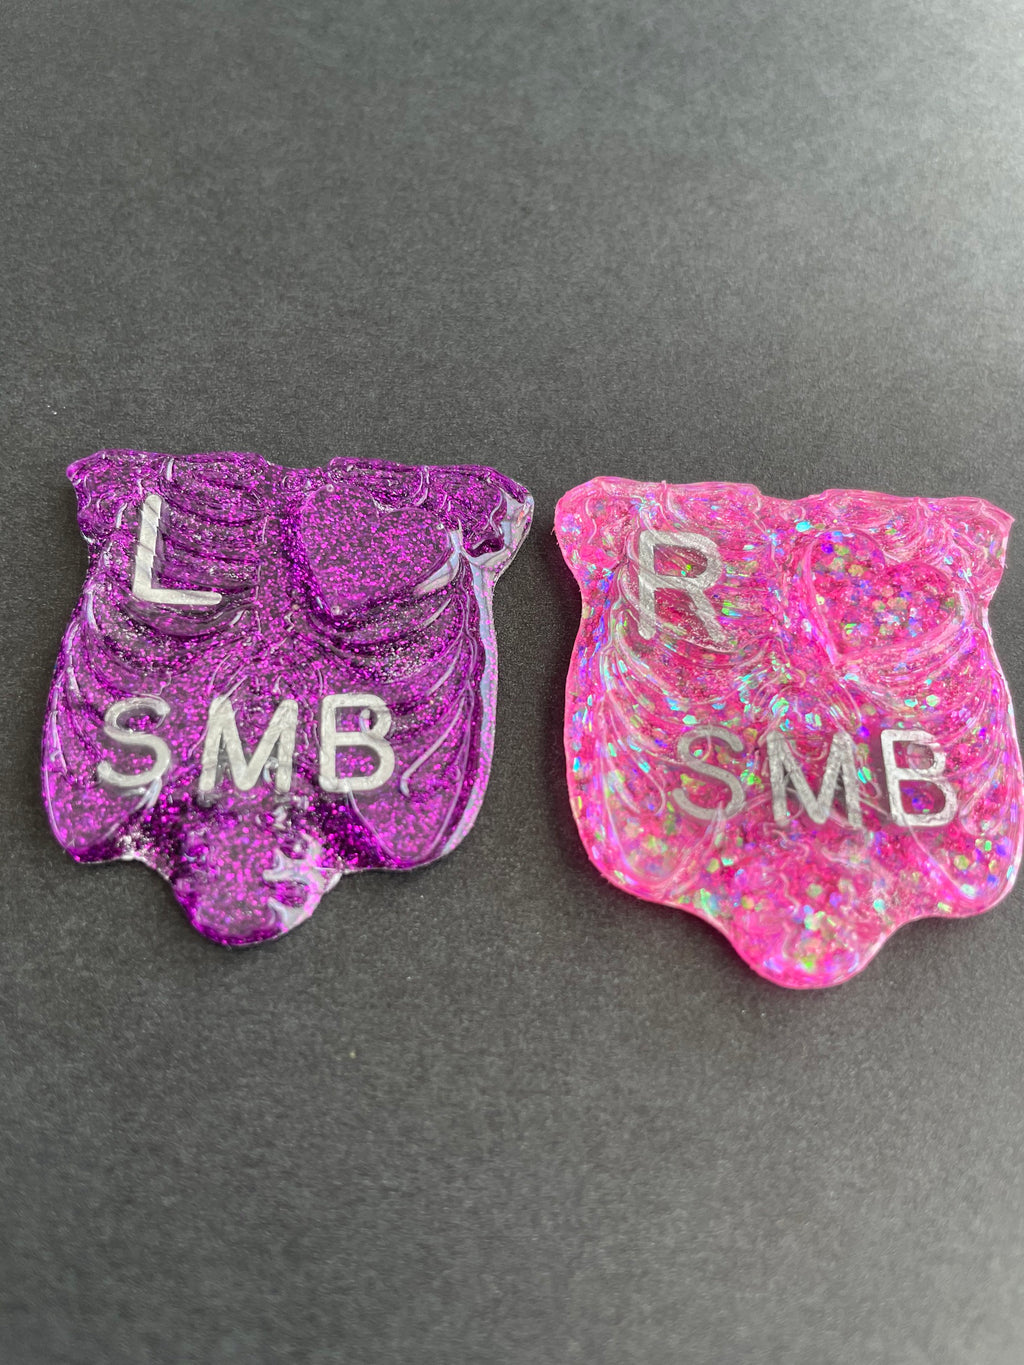 Rib Cage Xray Markers, Ribcage, Glitter, With 2 or 3 Initials, Heart, Bones, Thorax